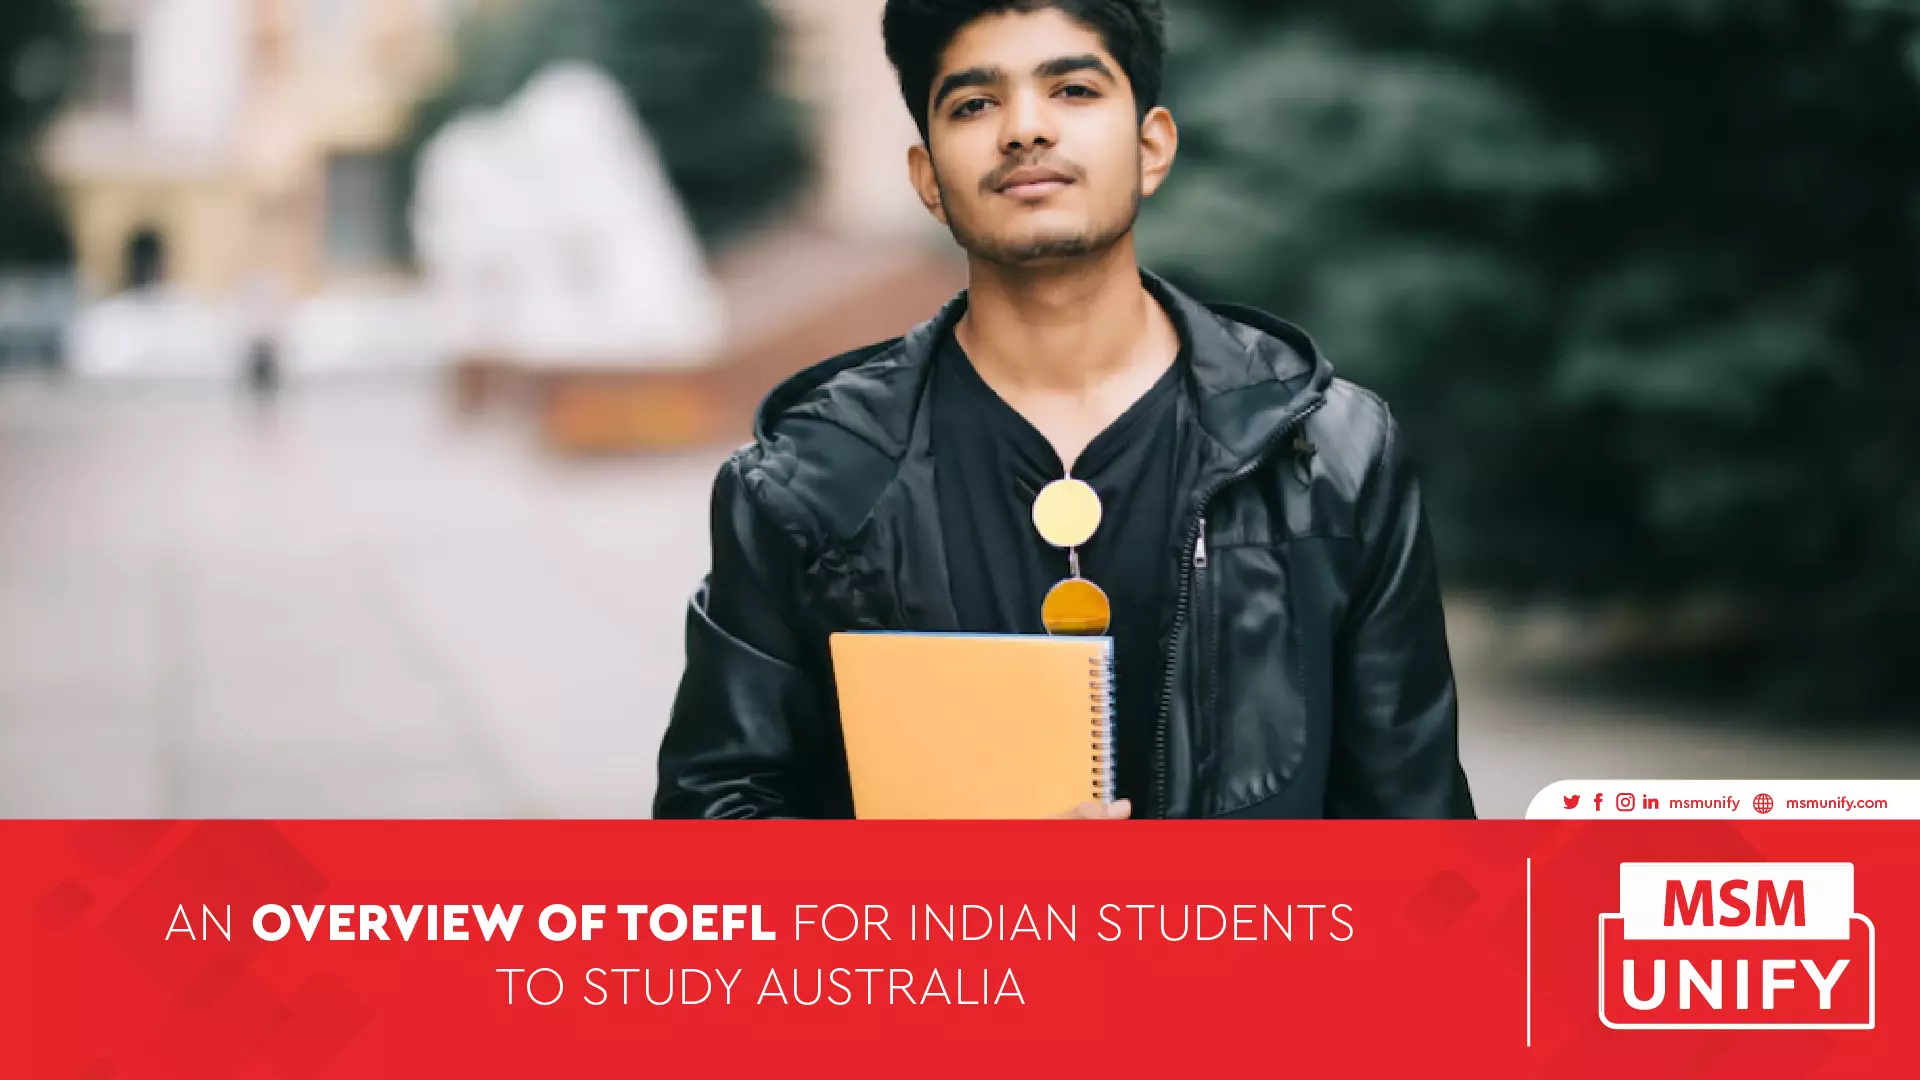 122822 MSM Unify An overview of TOEFL for Indian Students to Study in AUS 01